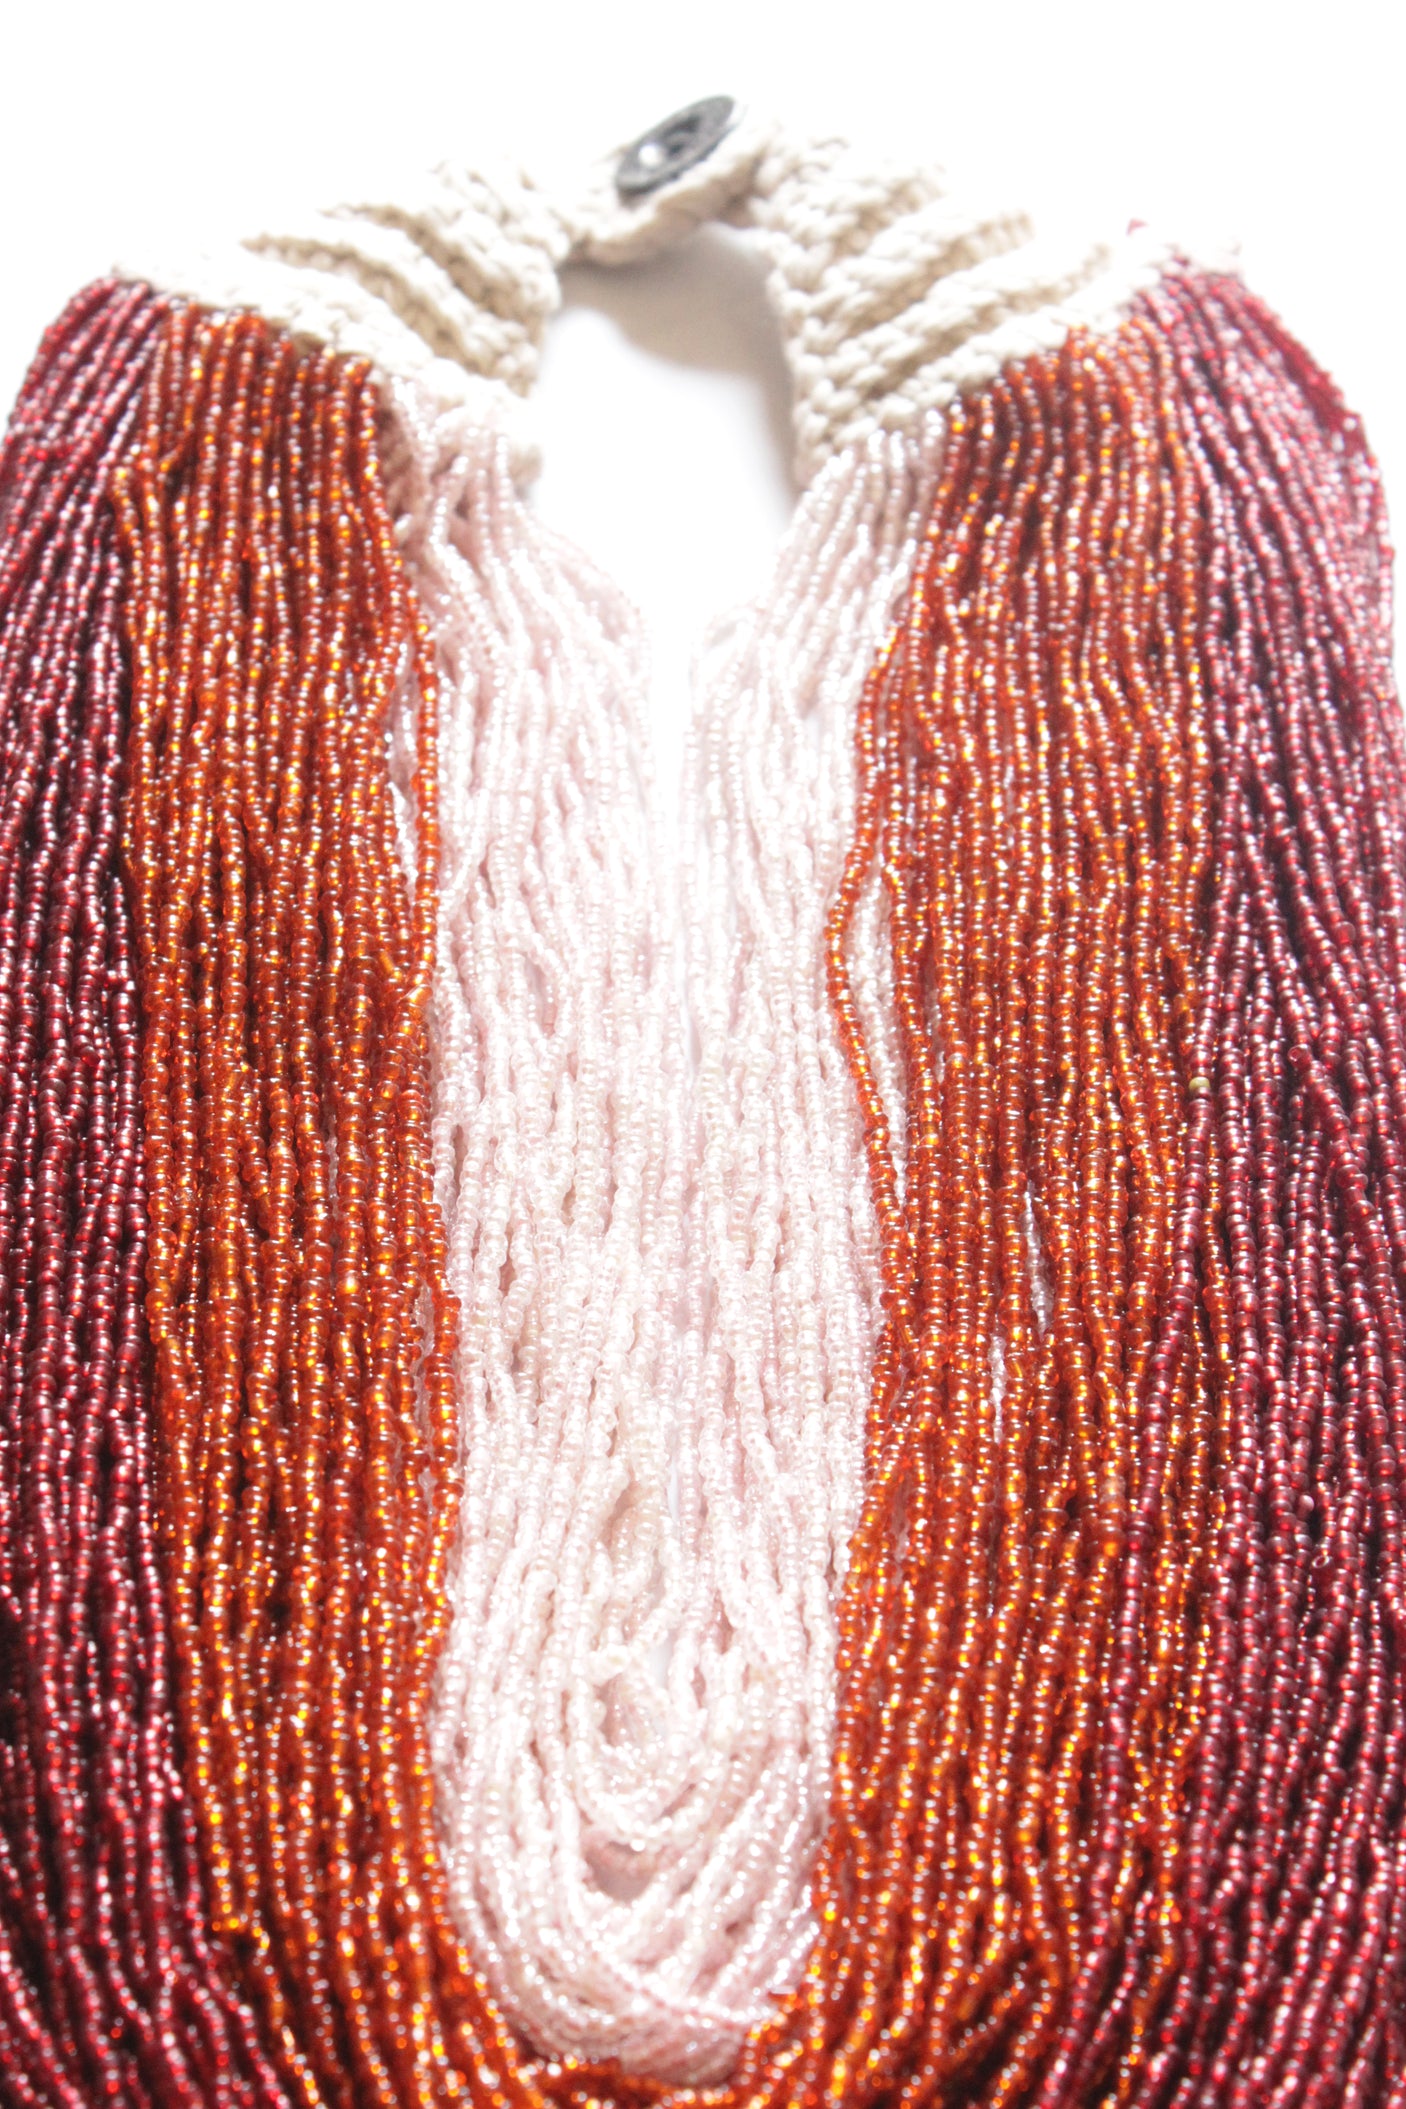 Maroon Orange and White Multi-Layer Hand Braided Necklace with Button Closure